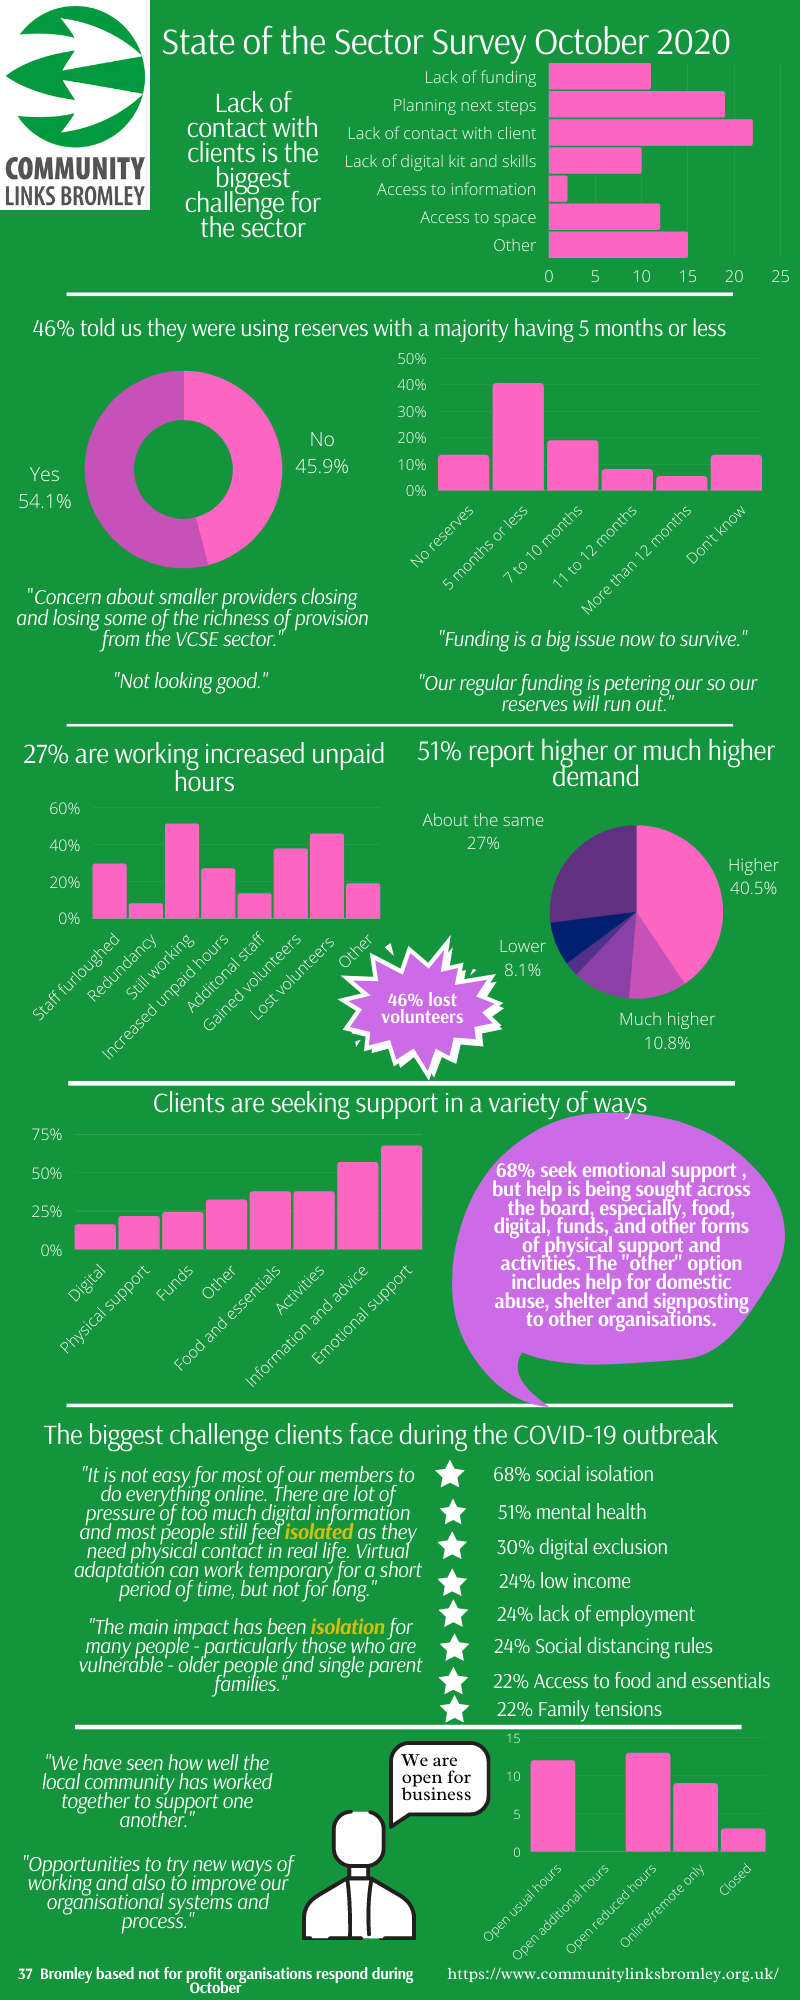 State of the sector Charity infographic Oct '20